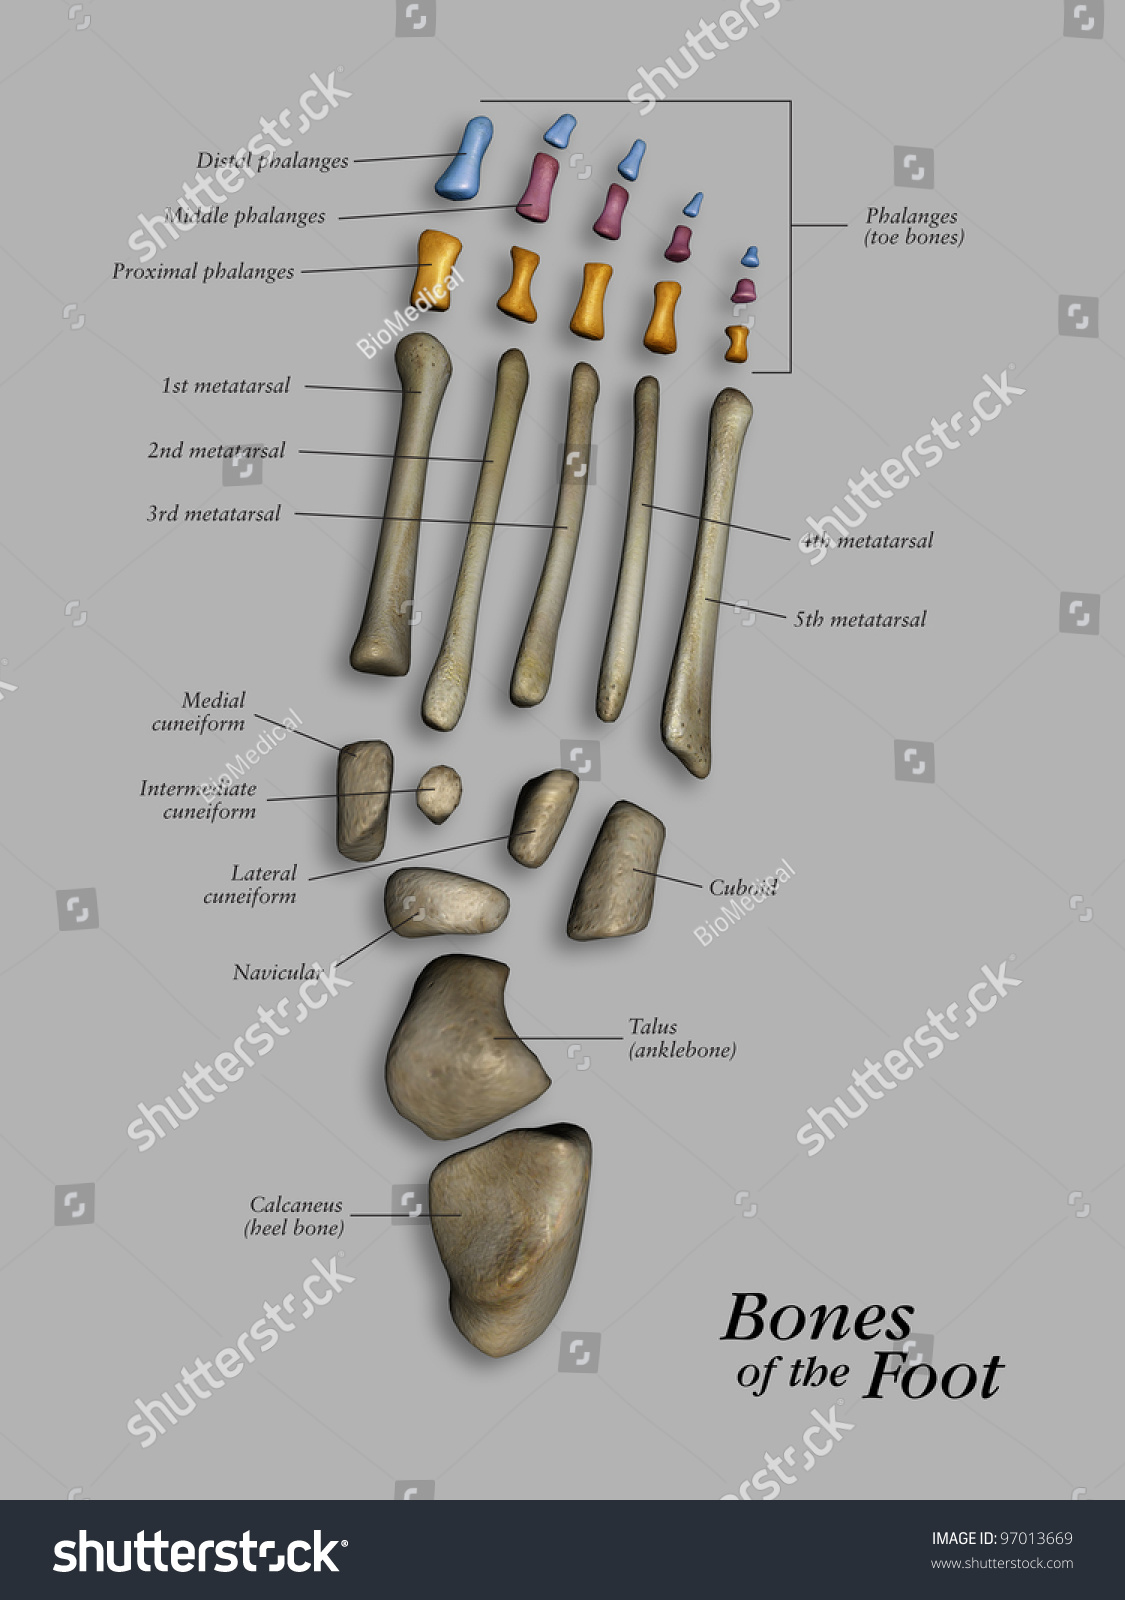 Bones Of The Foot, Labeled Stock Photo 97013669 : Shutterstock